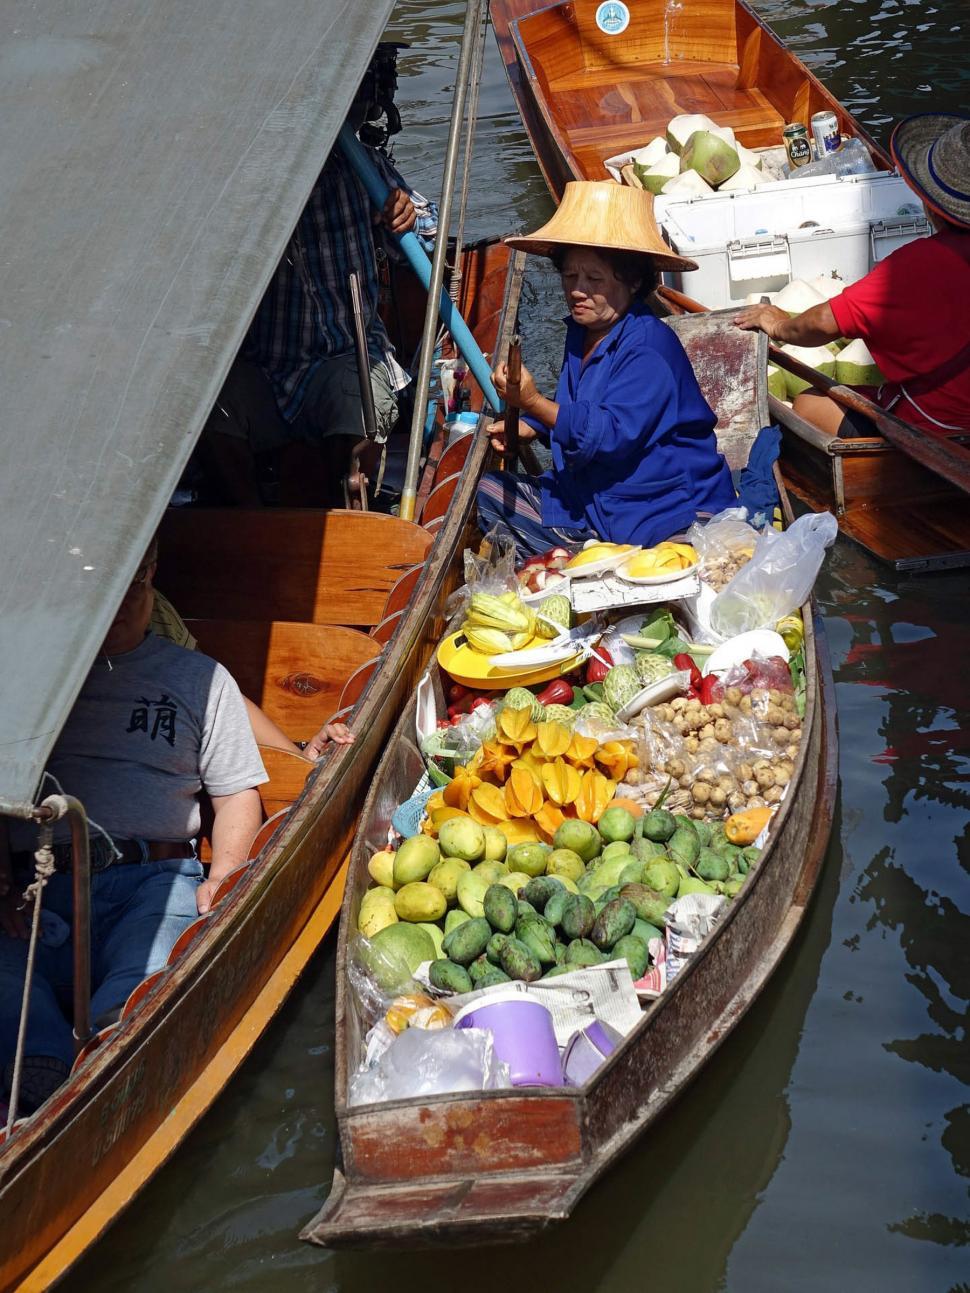 Free Image of Woman Sitting in Boat Filled With Fruits and Vegetables 